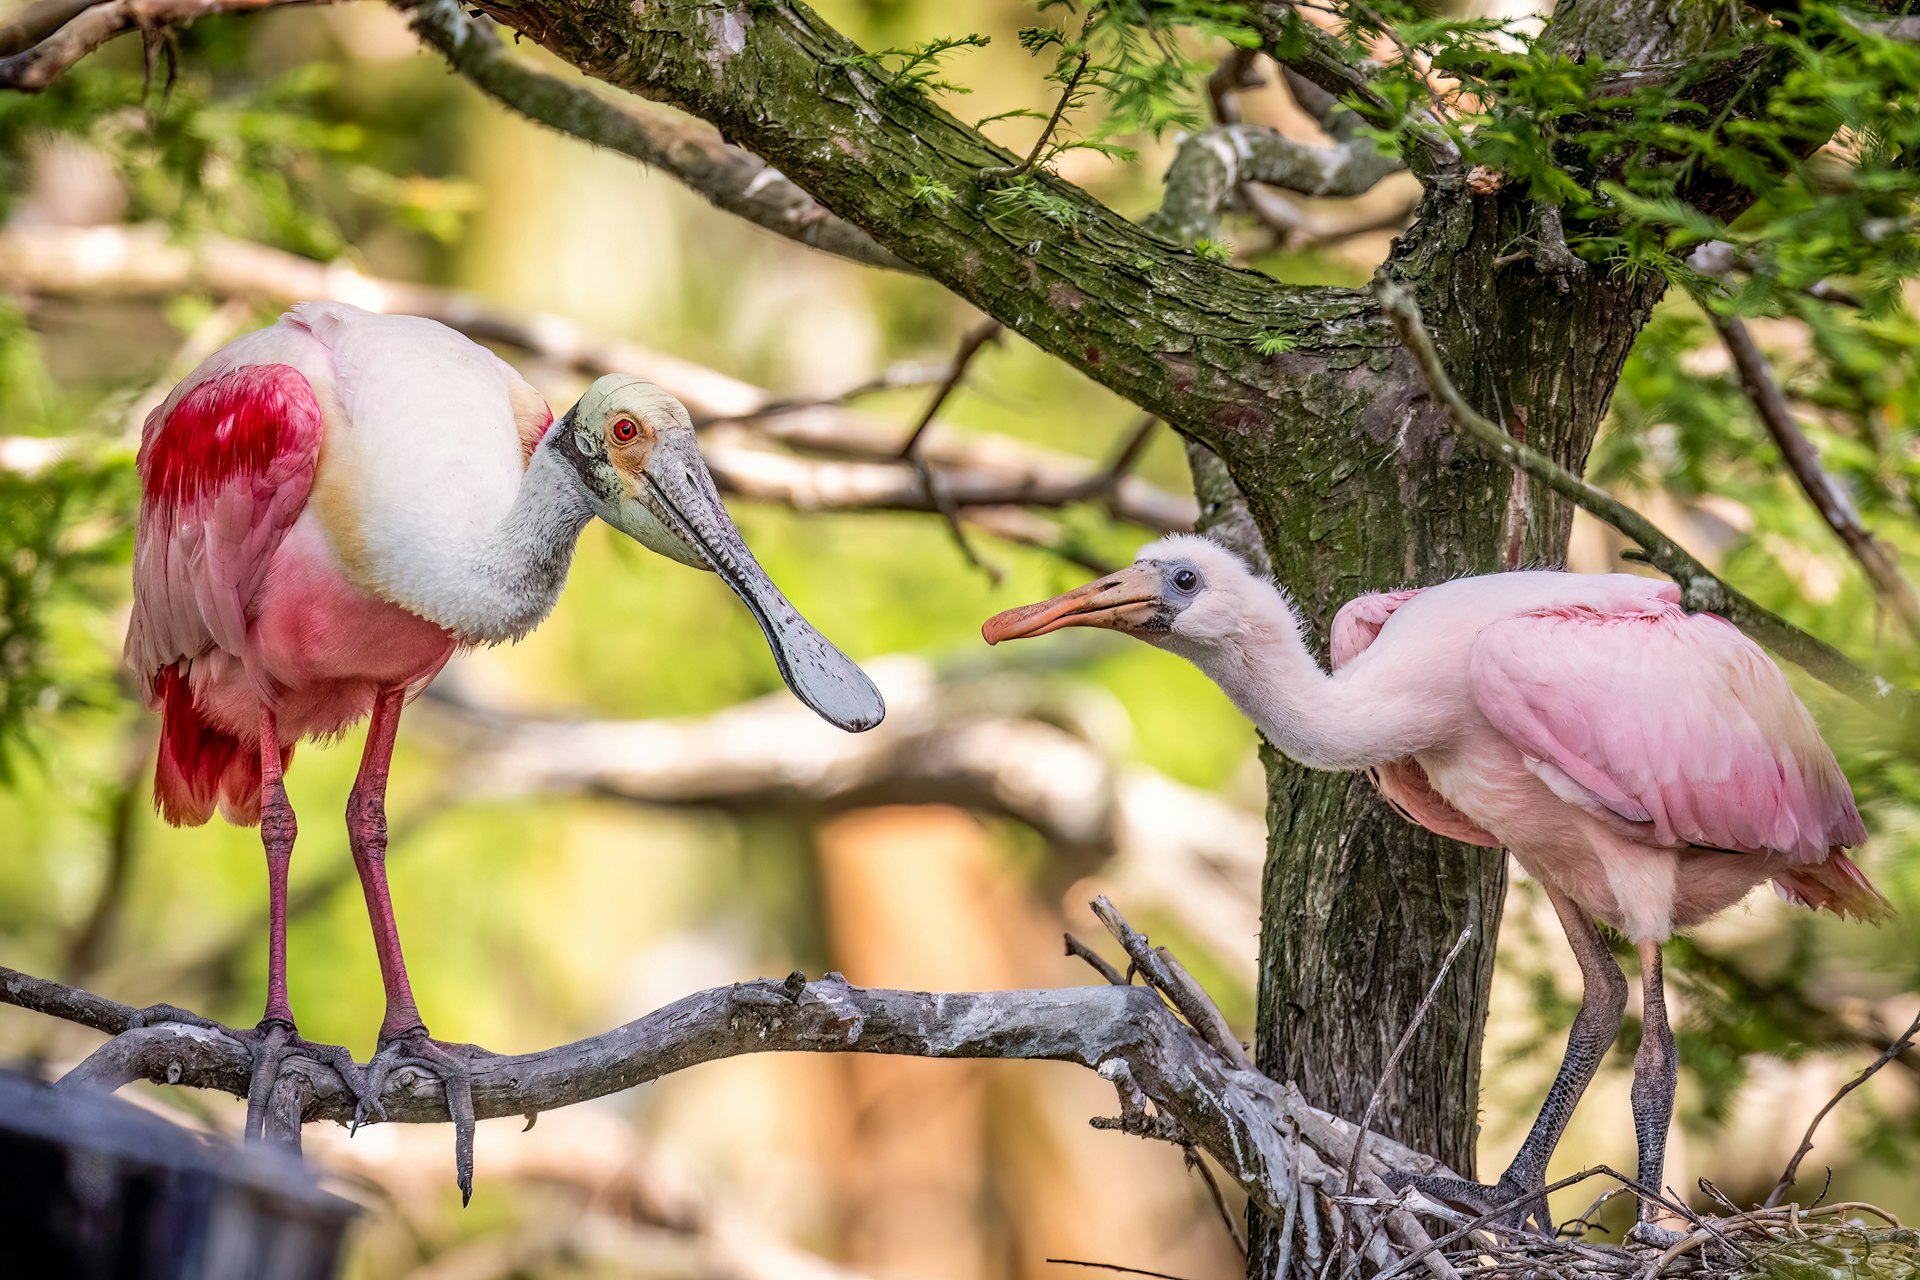 A Roseate Spoonbill with its young chick